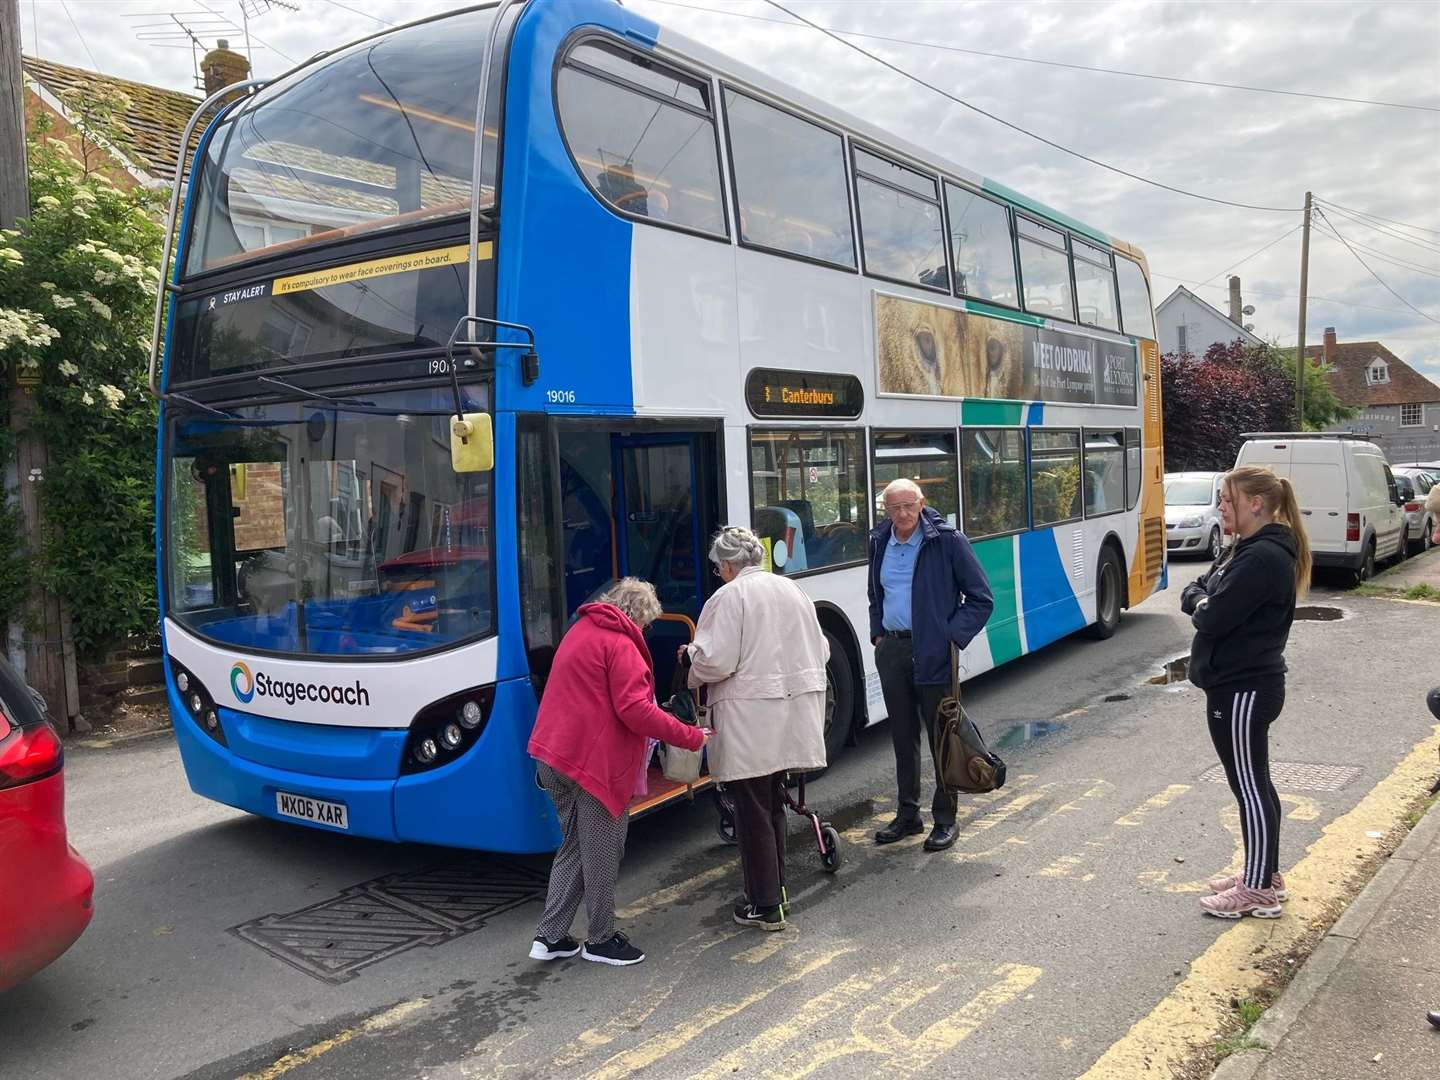 Passengers board the last Stagecoach bus at Oare